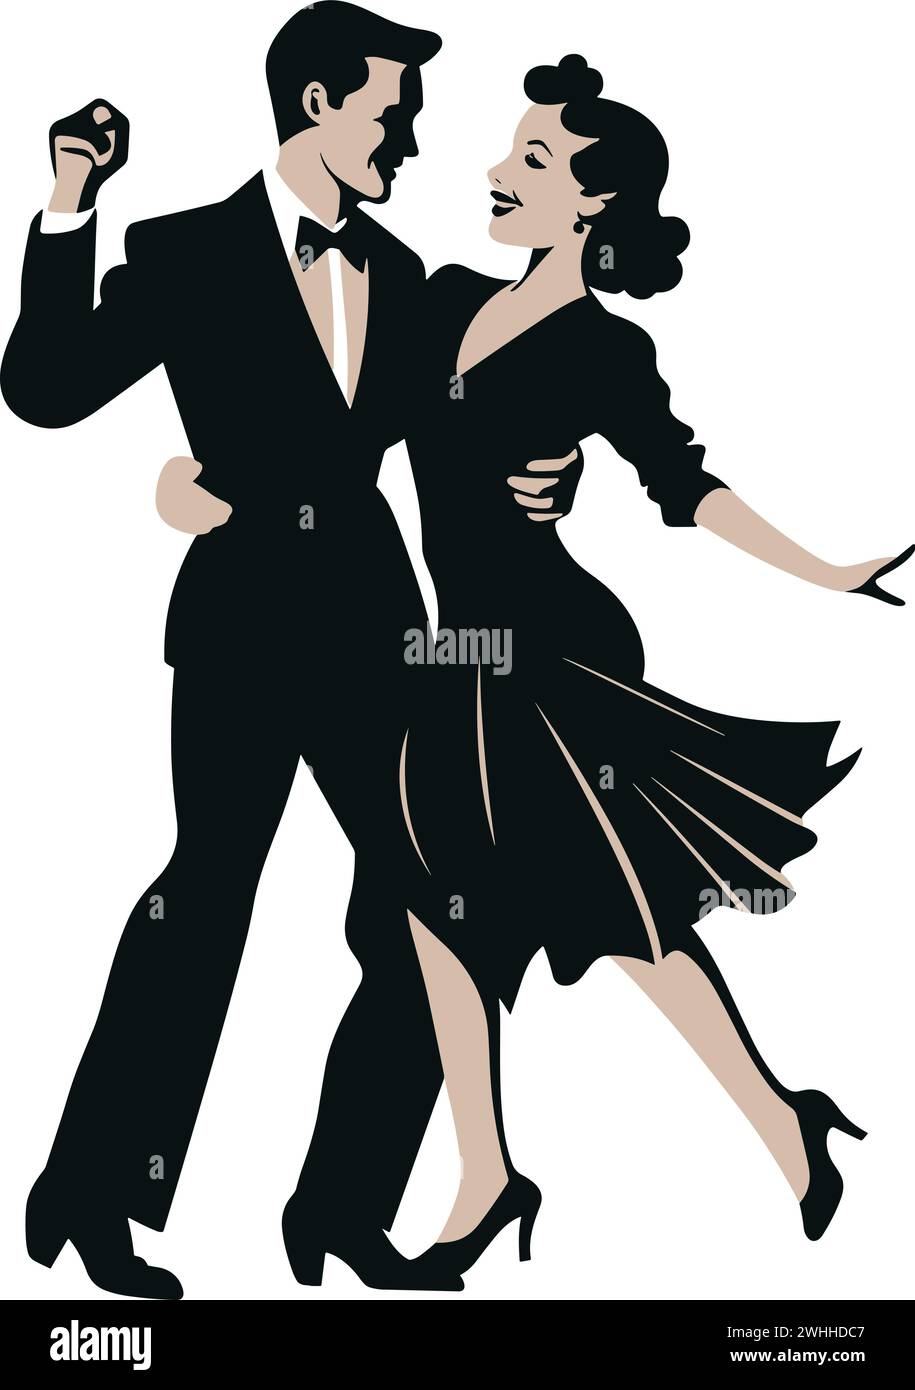 Classic Boogie-Woogie Dance Move Vector for Dance Classes and Swing Revivals Stock Vector